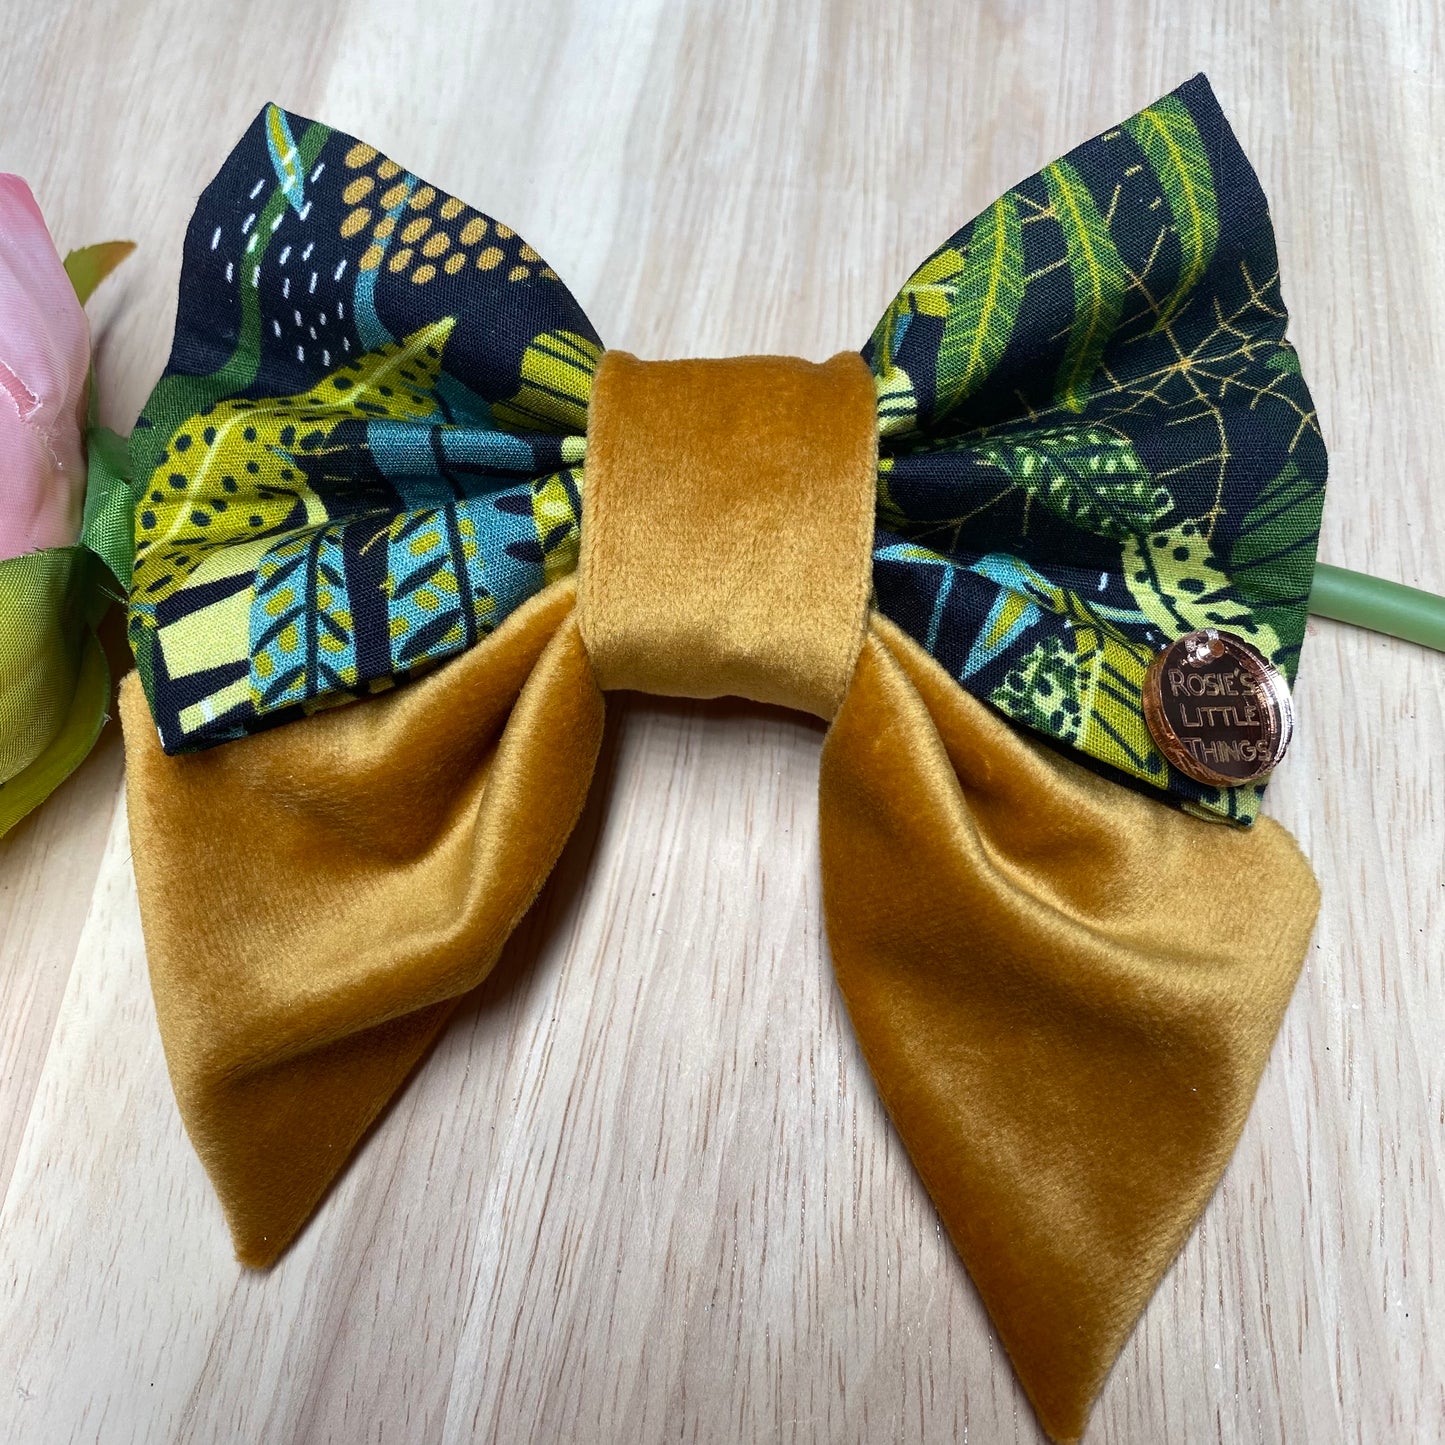 Willow - Sailor Bow